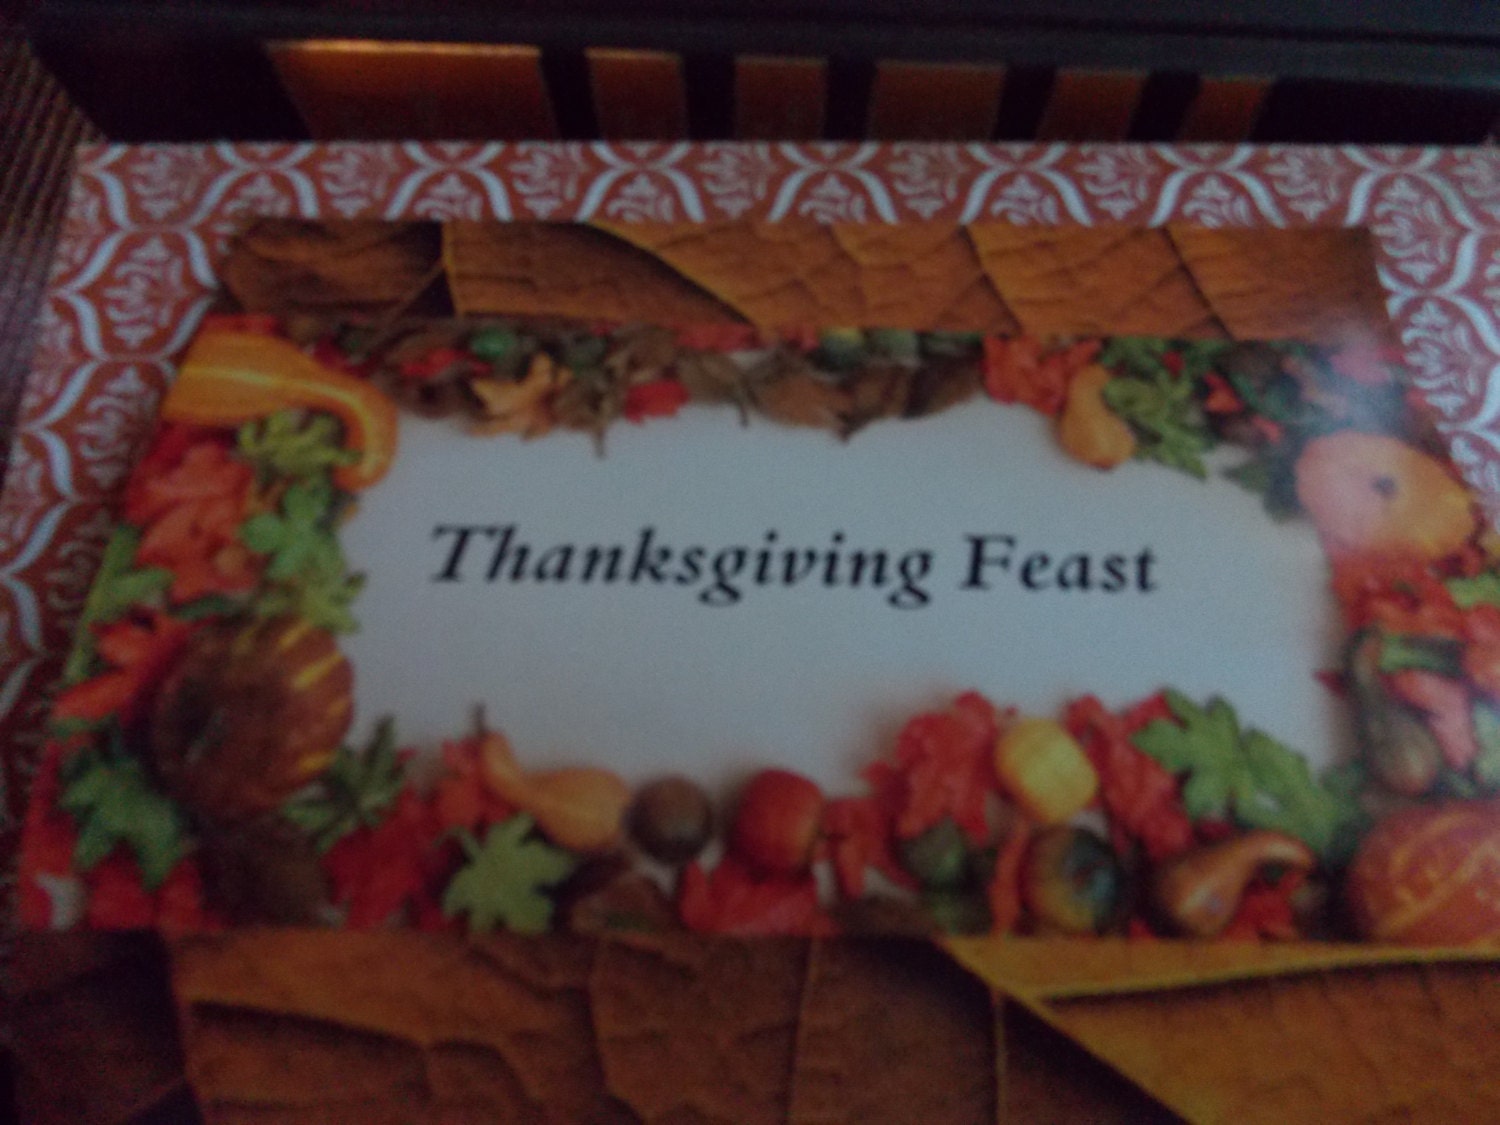 Thanksgiving Feast candy bar wrappers kit ( Candy not included) - BlueSkyeJunction